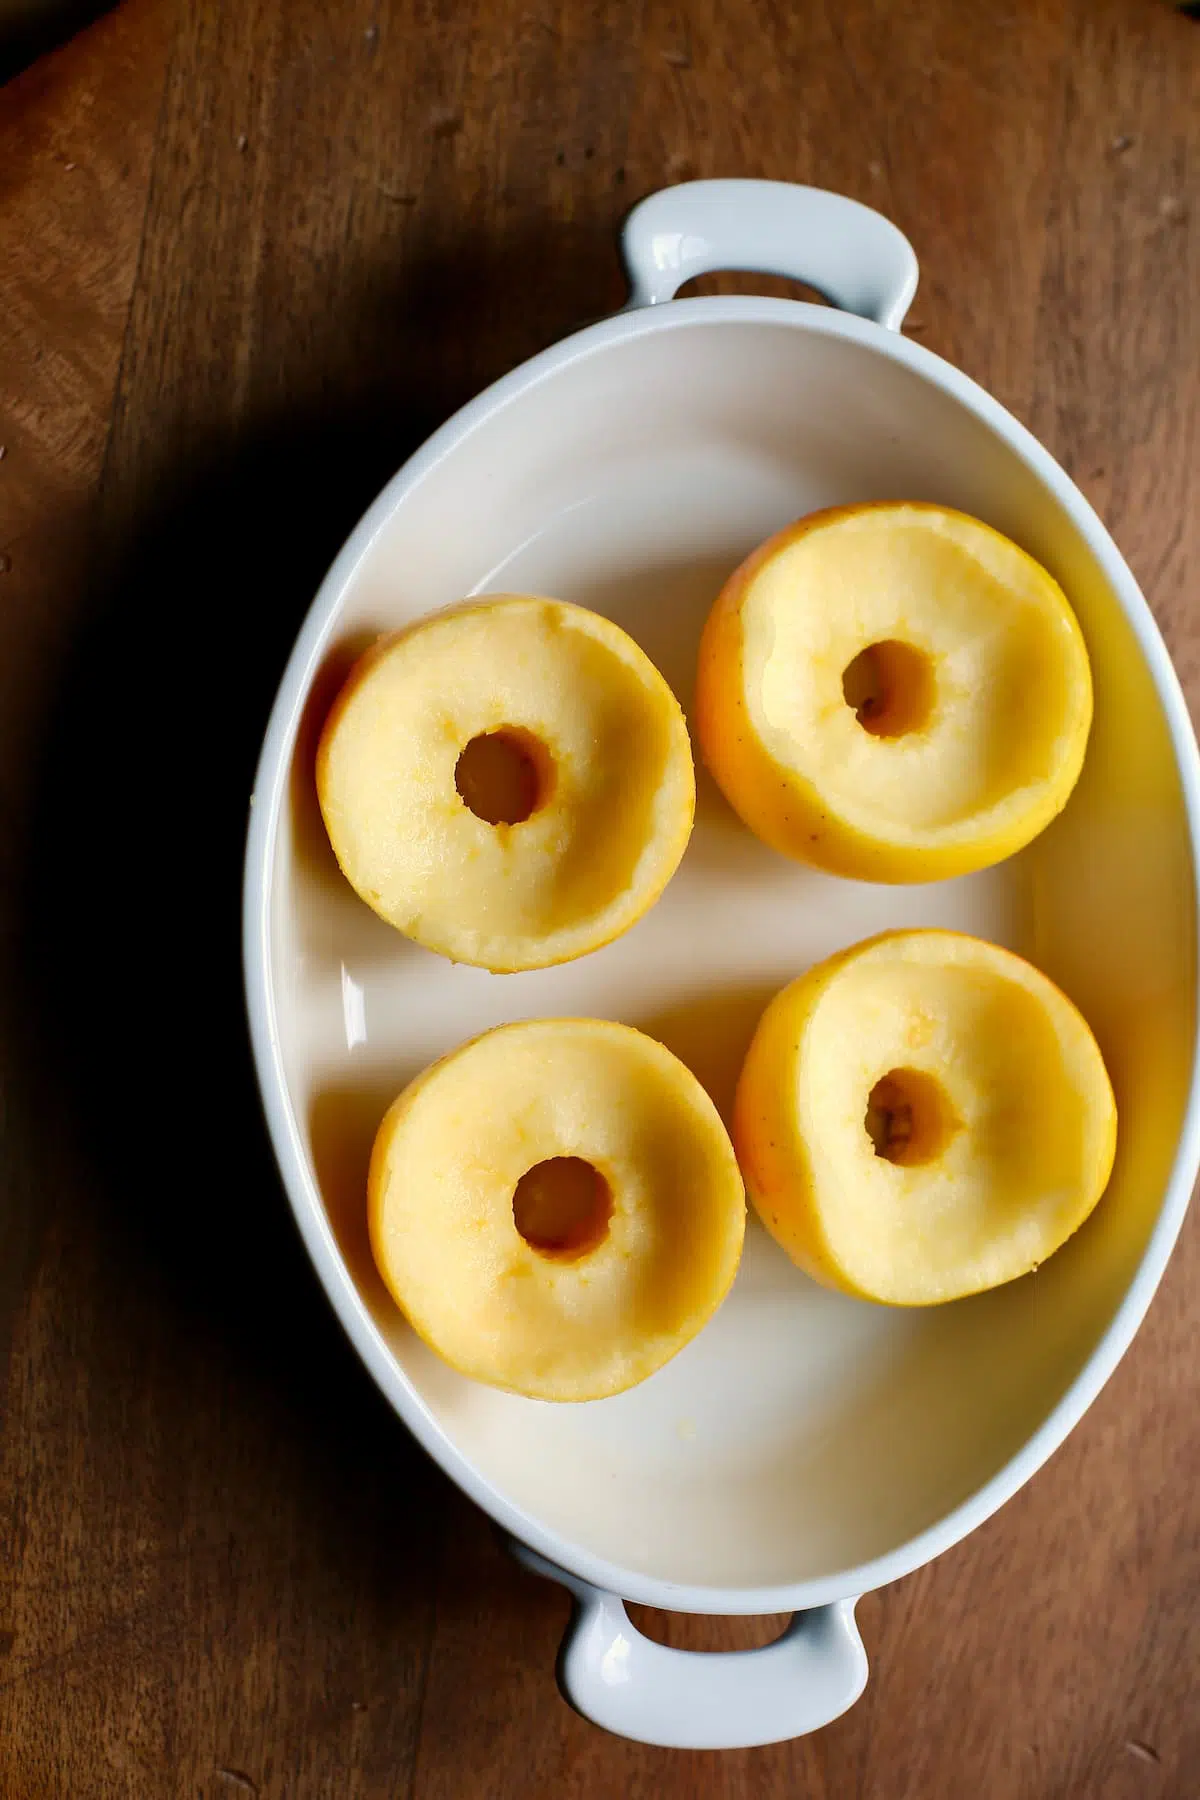 a baking dish with apples that have been cored and scooped out to make room for the filling of these baked apples.